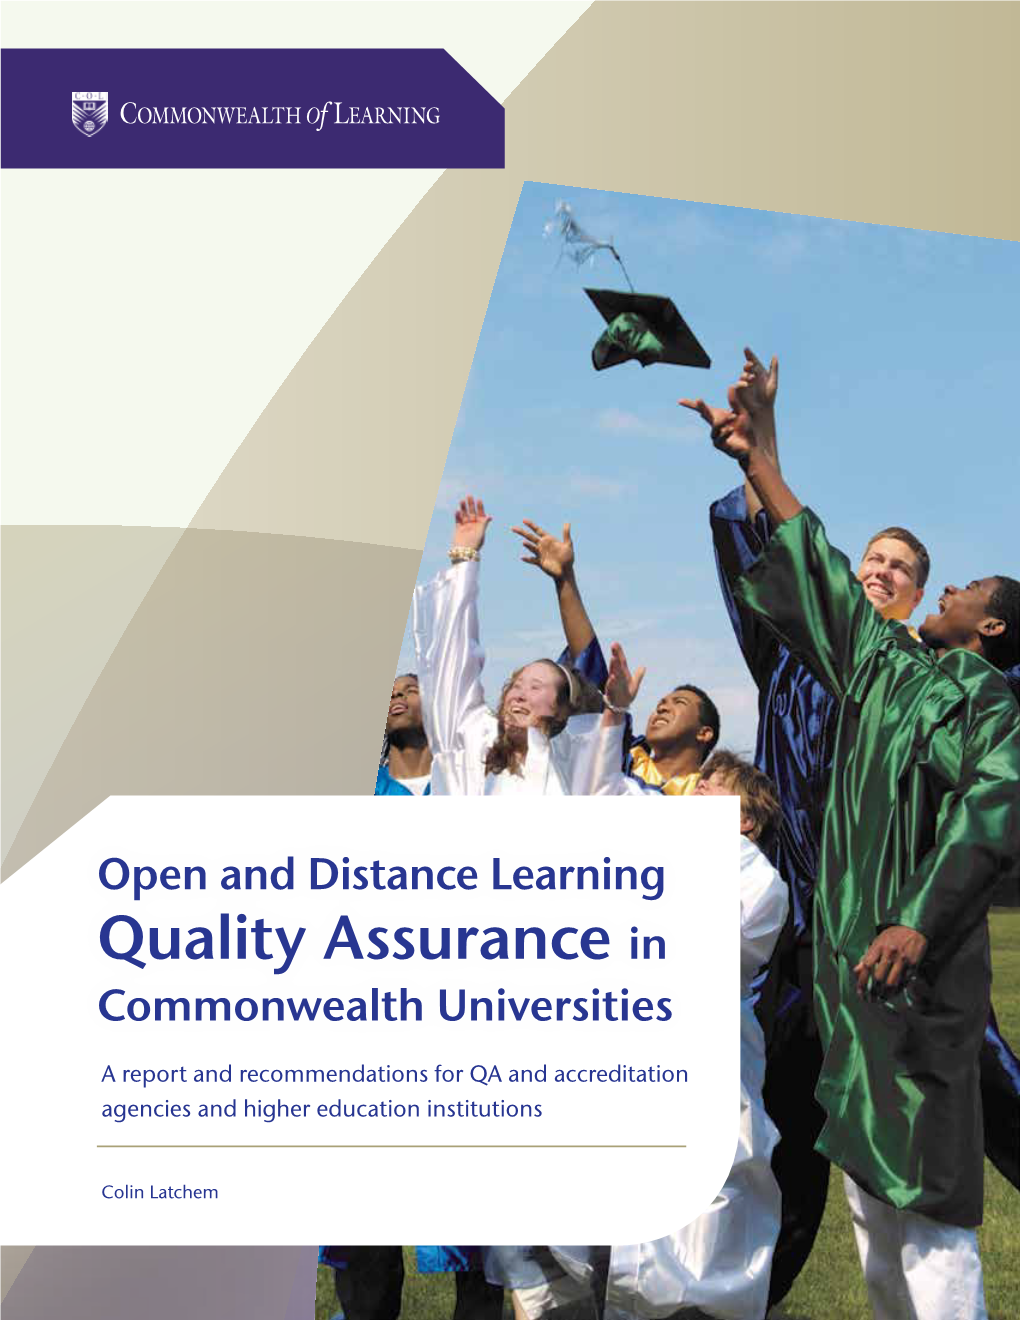 Open and Distance Learning Quality Assurance in Commonwealth Universities